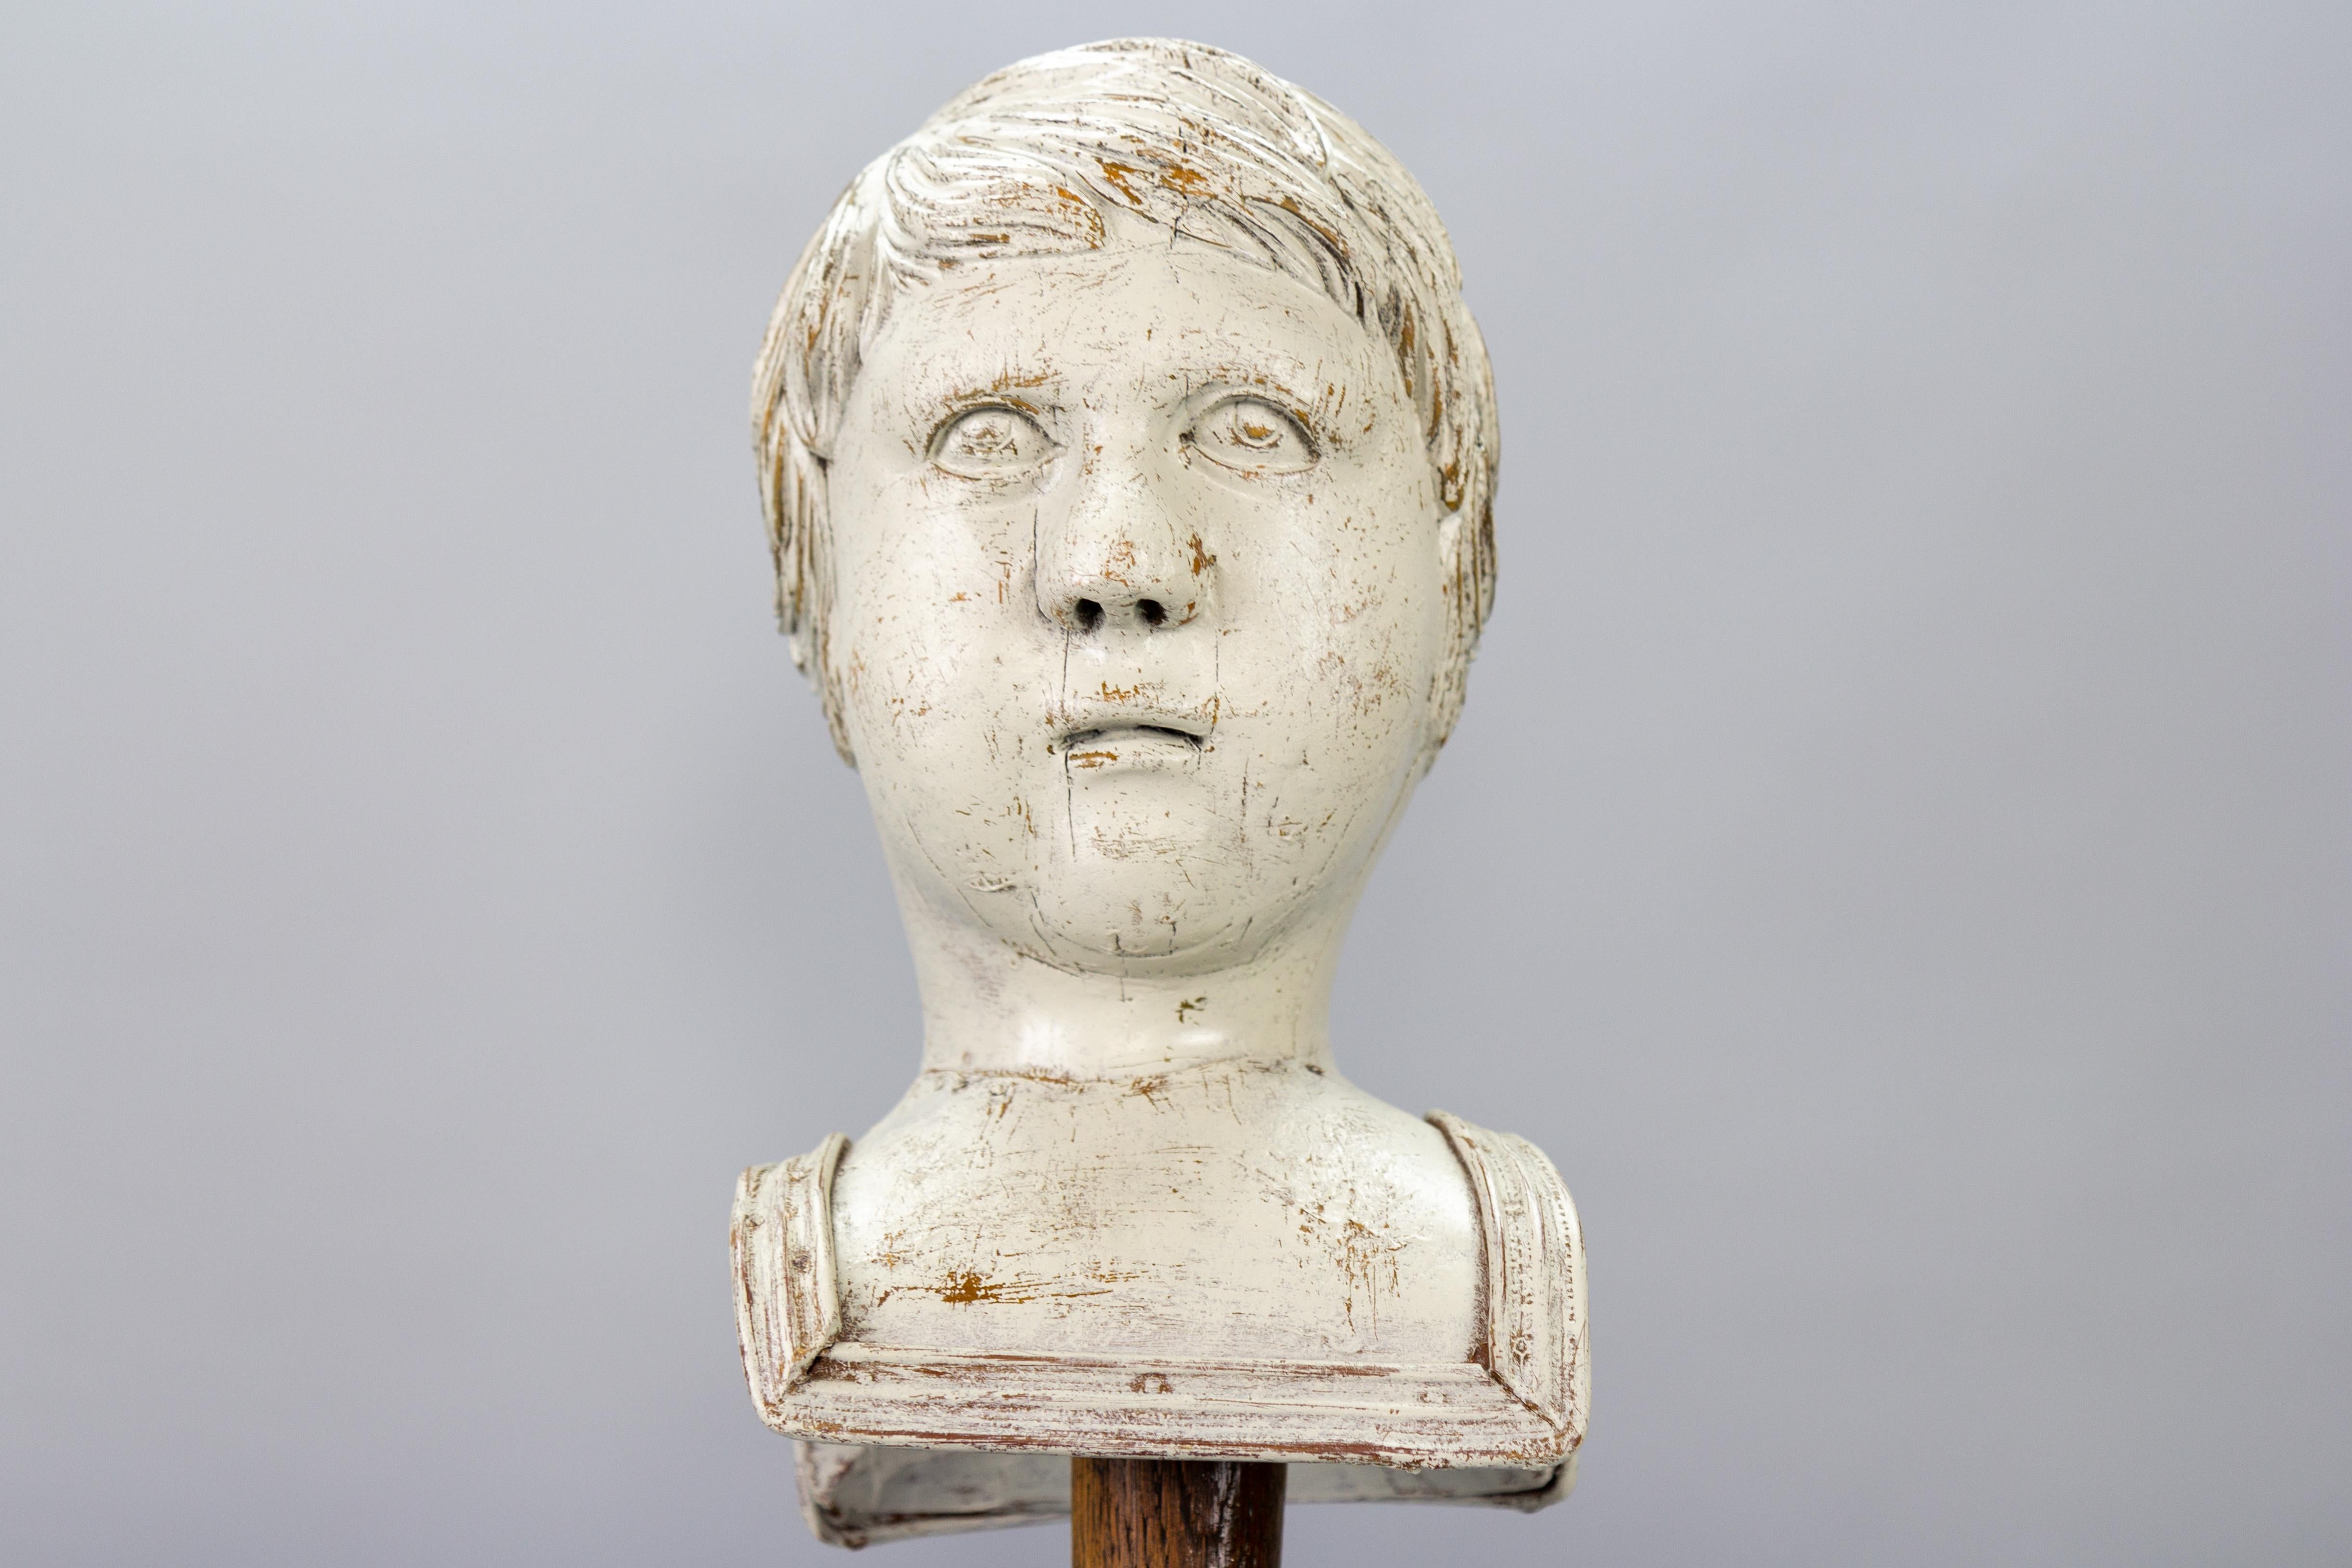 French Whitewashed Carved Wooden Sculpture Head or Bust on a Pedestal For Sale 3